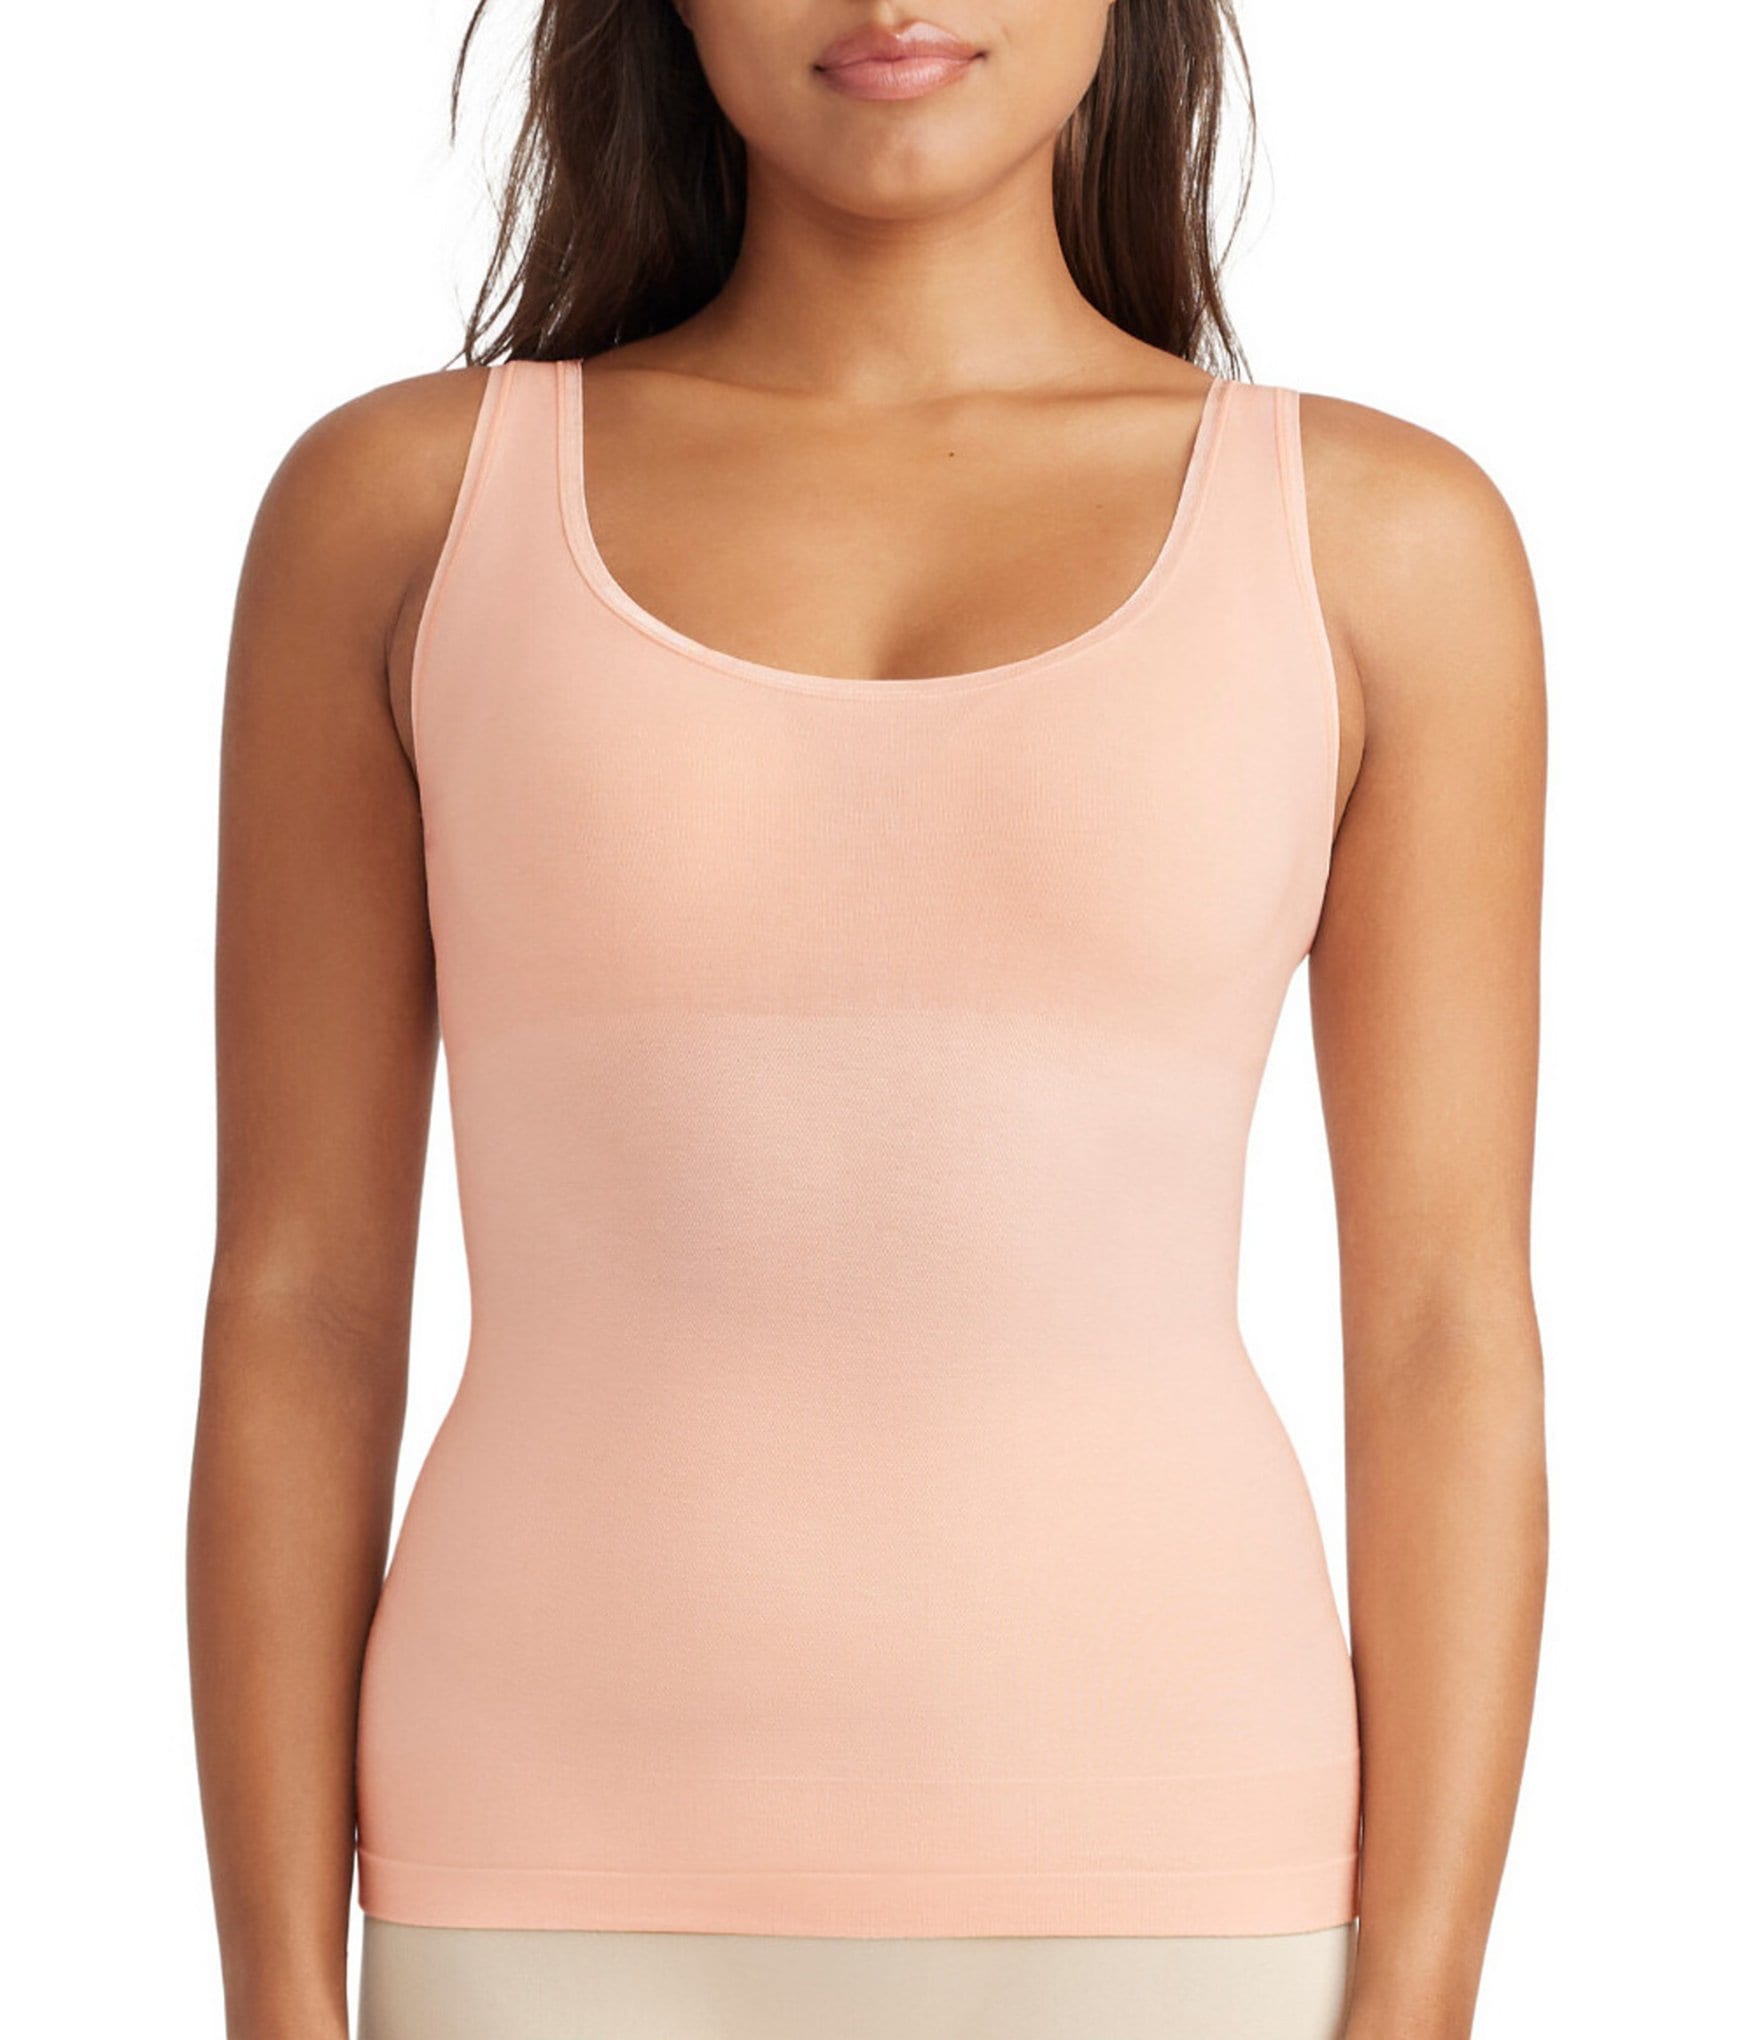 YUMMIE SHAPE Women's Slimming Shapewear Tank Top Nude Size S/M NEW - $22  New With Tags - From Jessica